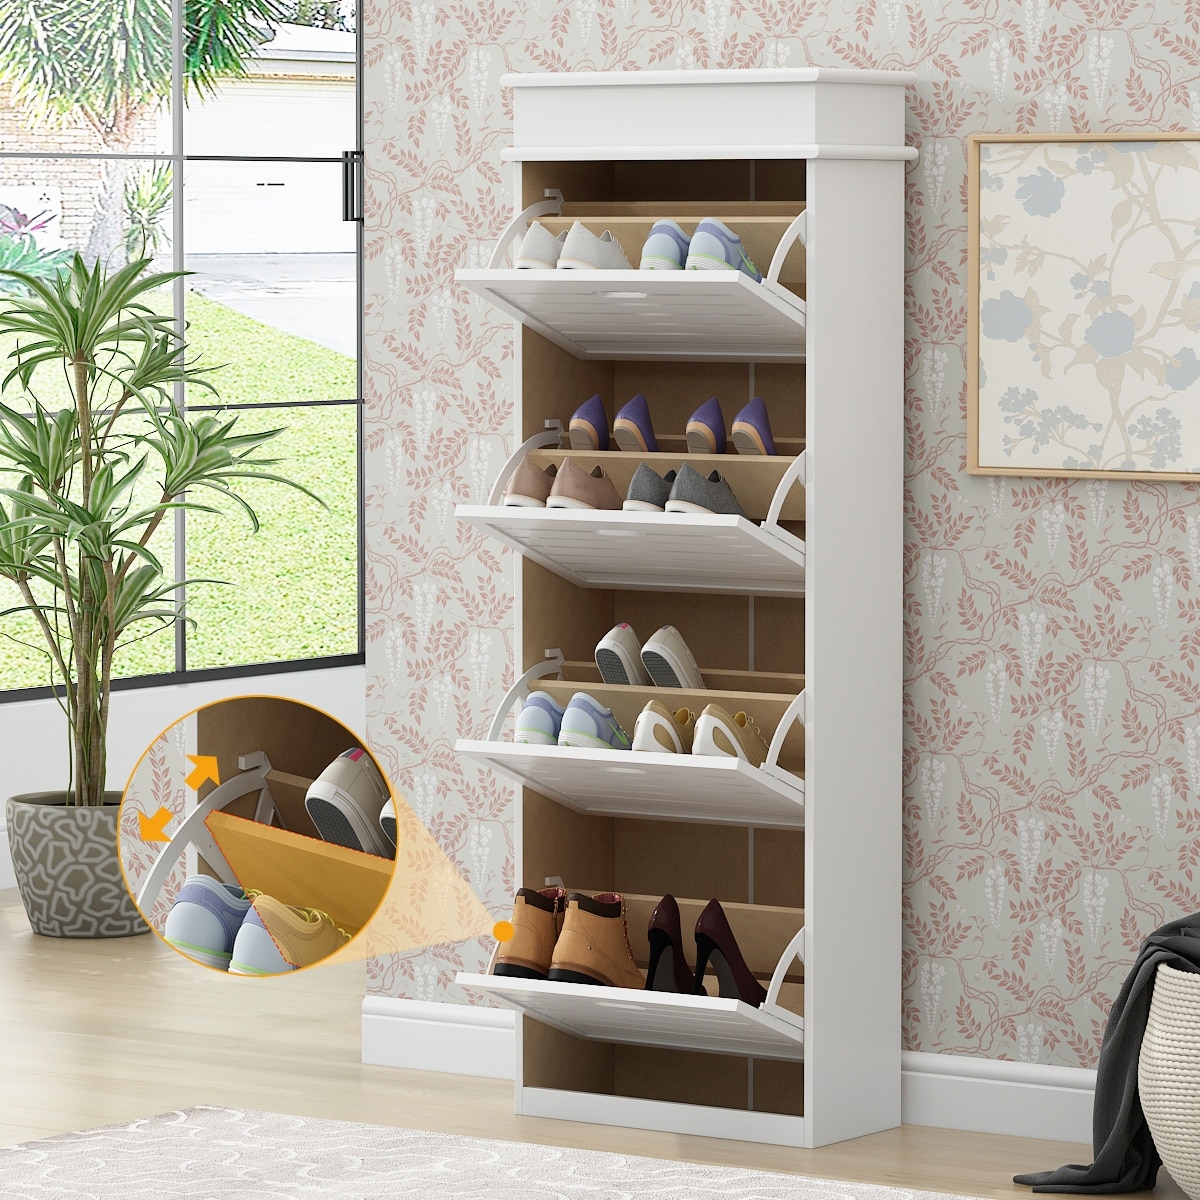 https://ak1.ostkcdn.com/images/products/is/images/direct/f833e7d9e5cc2b0ec99c67bc2445baf8eac3e552/16-Pair-Shoe-Rack-Storage-Cabinet-Organizer-with-4-Drawers.jpg